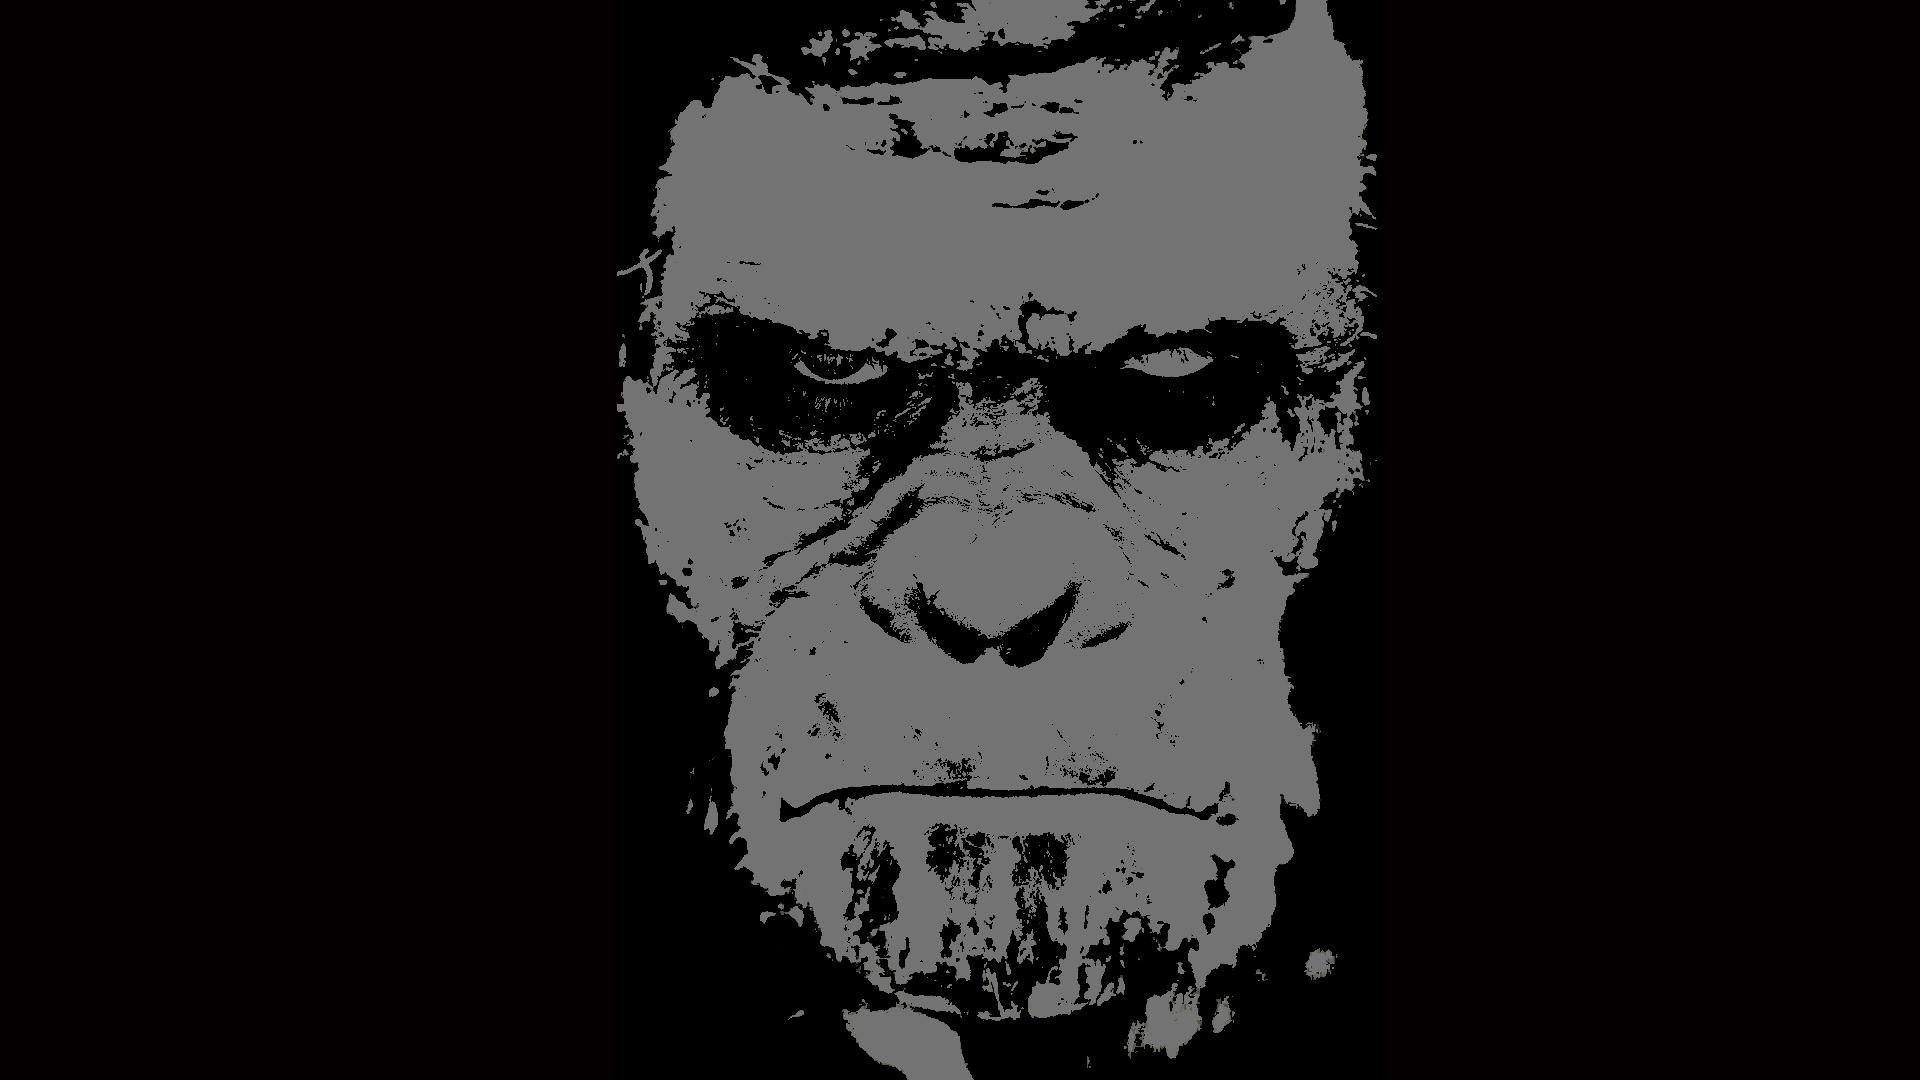 dawn of the apes, Action, Drama, Sci fi, Dawn, Planet, Apes, Monkey, Adventure,  46 Wallpaper